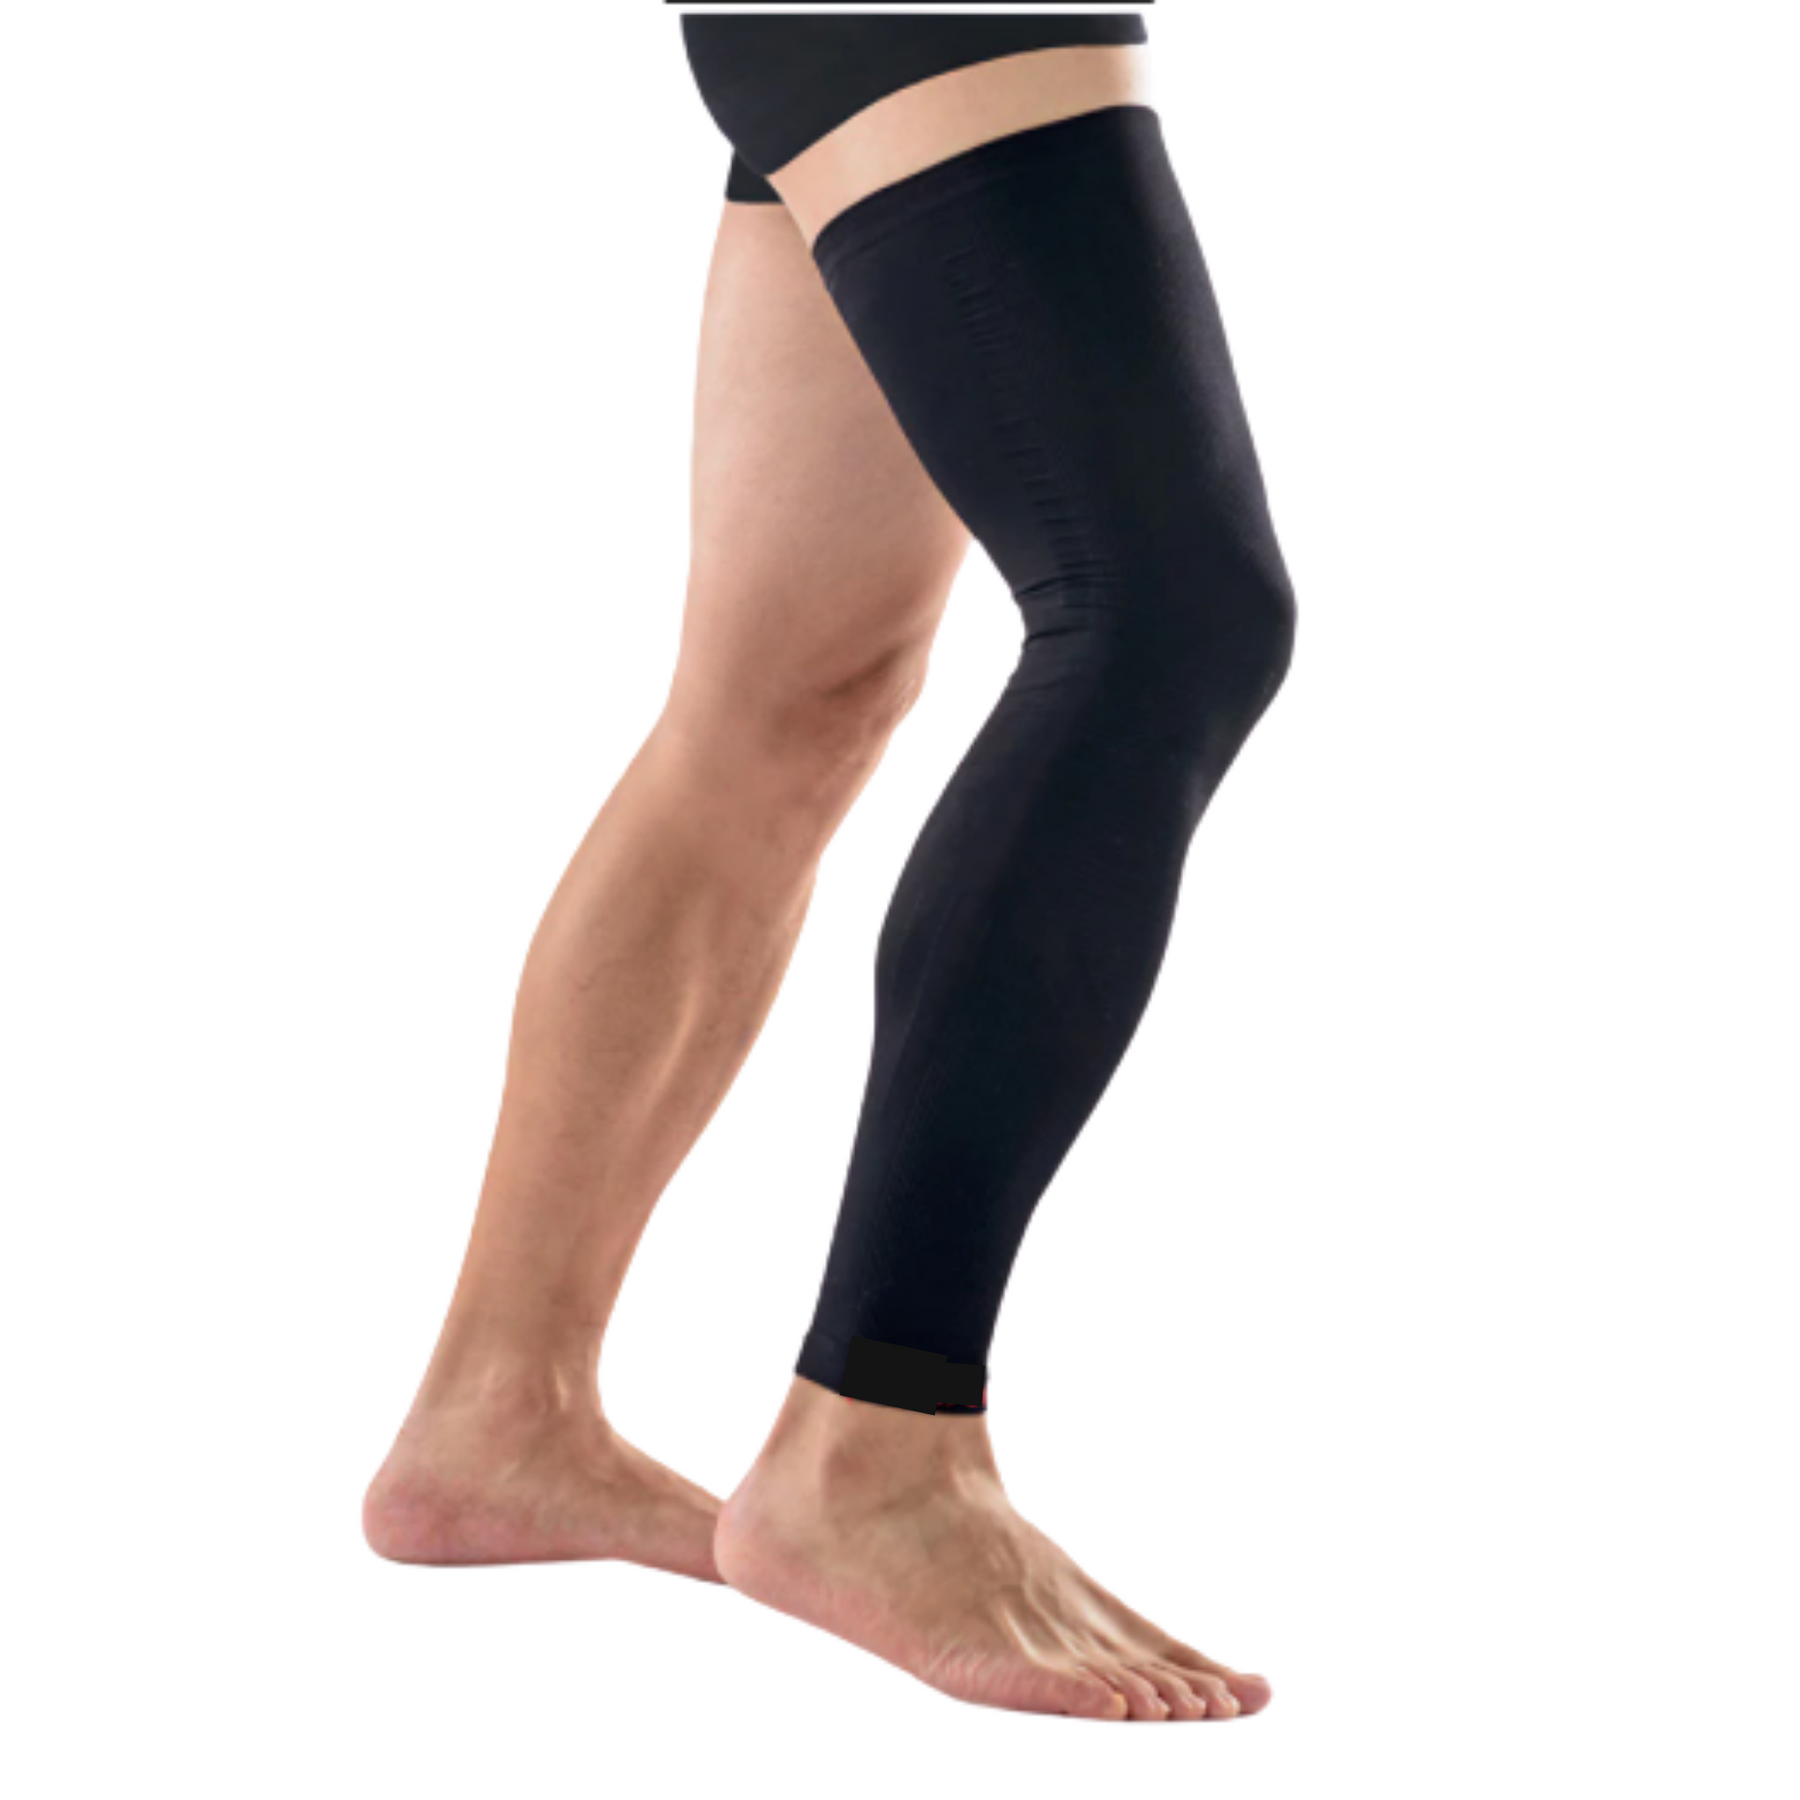 Full Leg Compression Sleeve Copper Knee Sleeves Support for Thigh